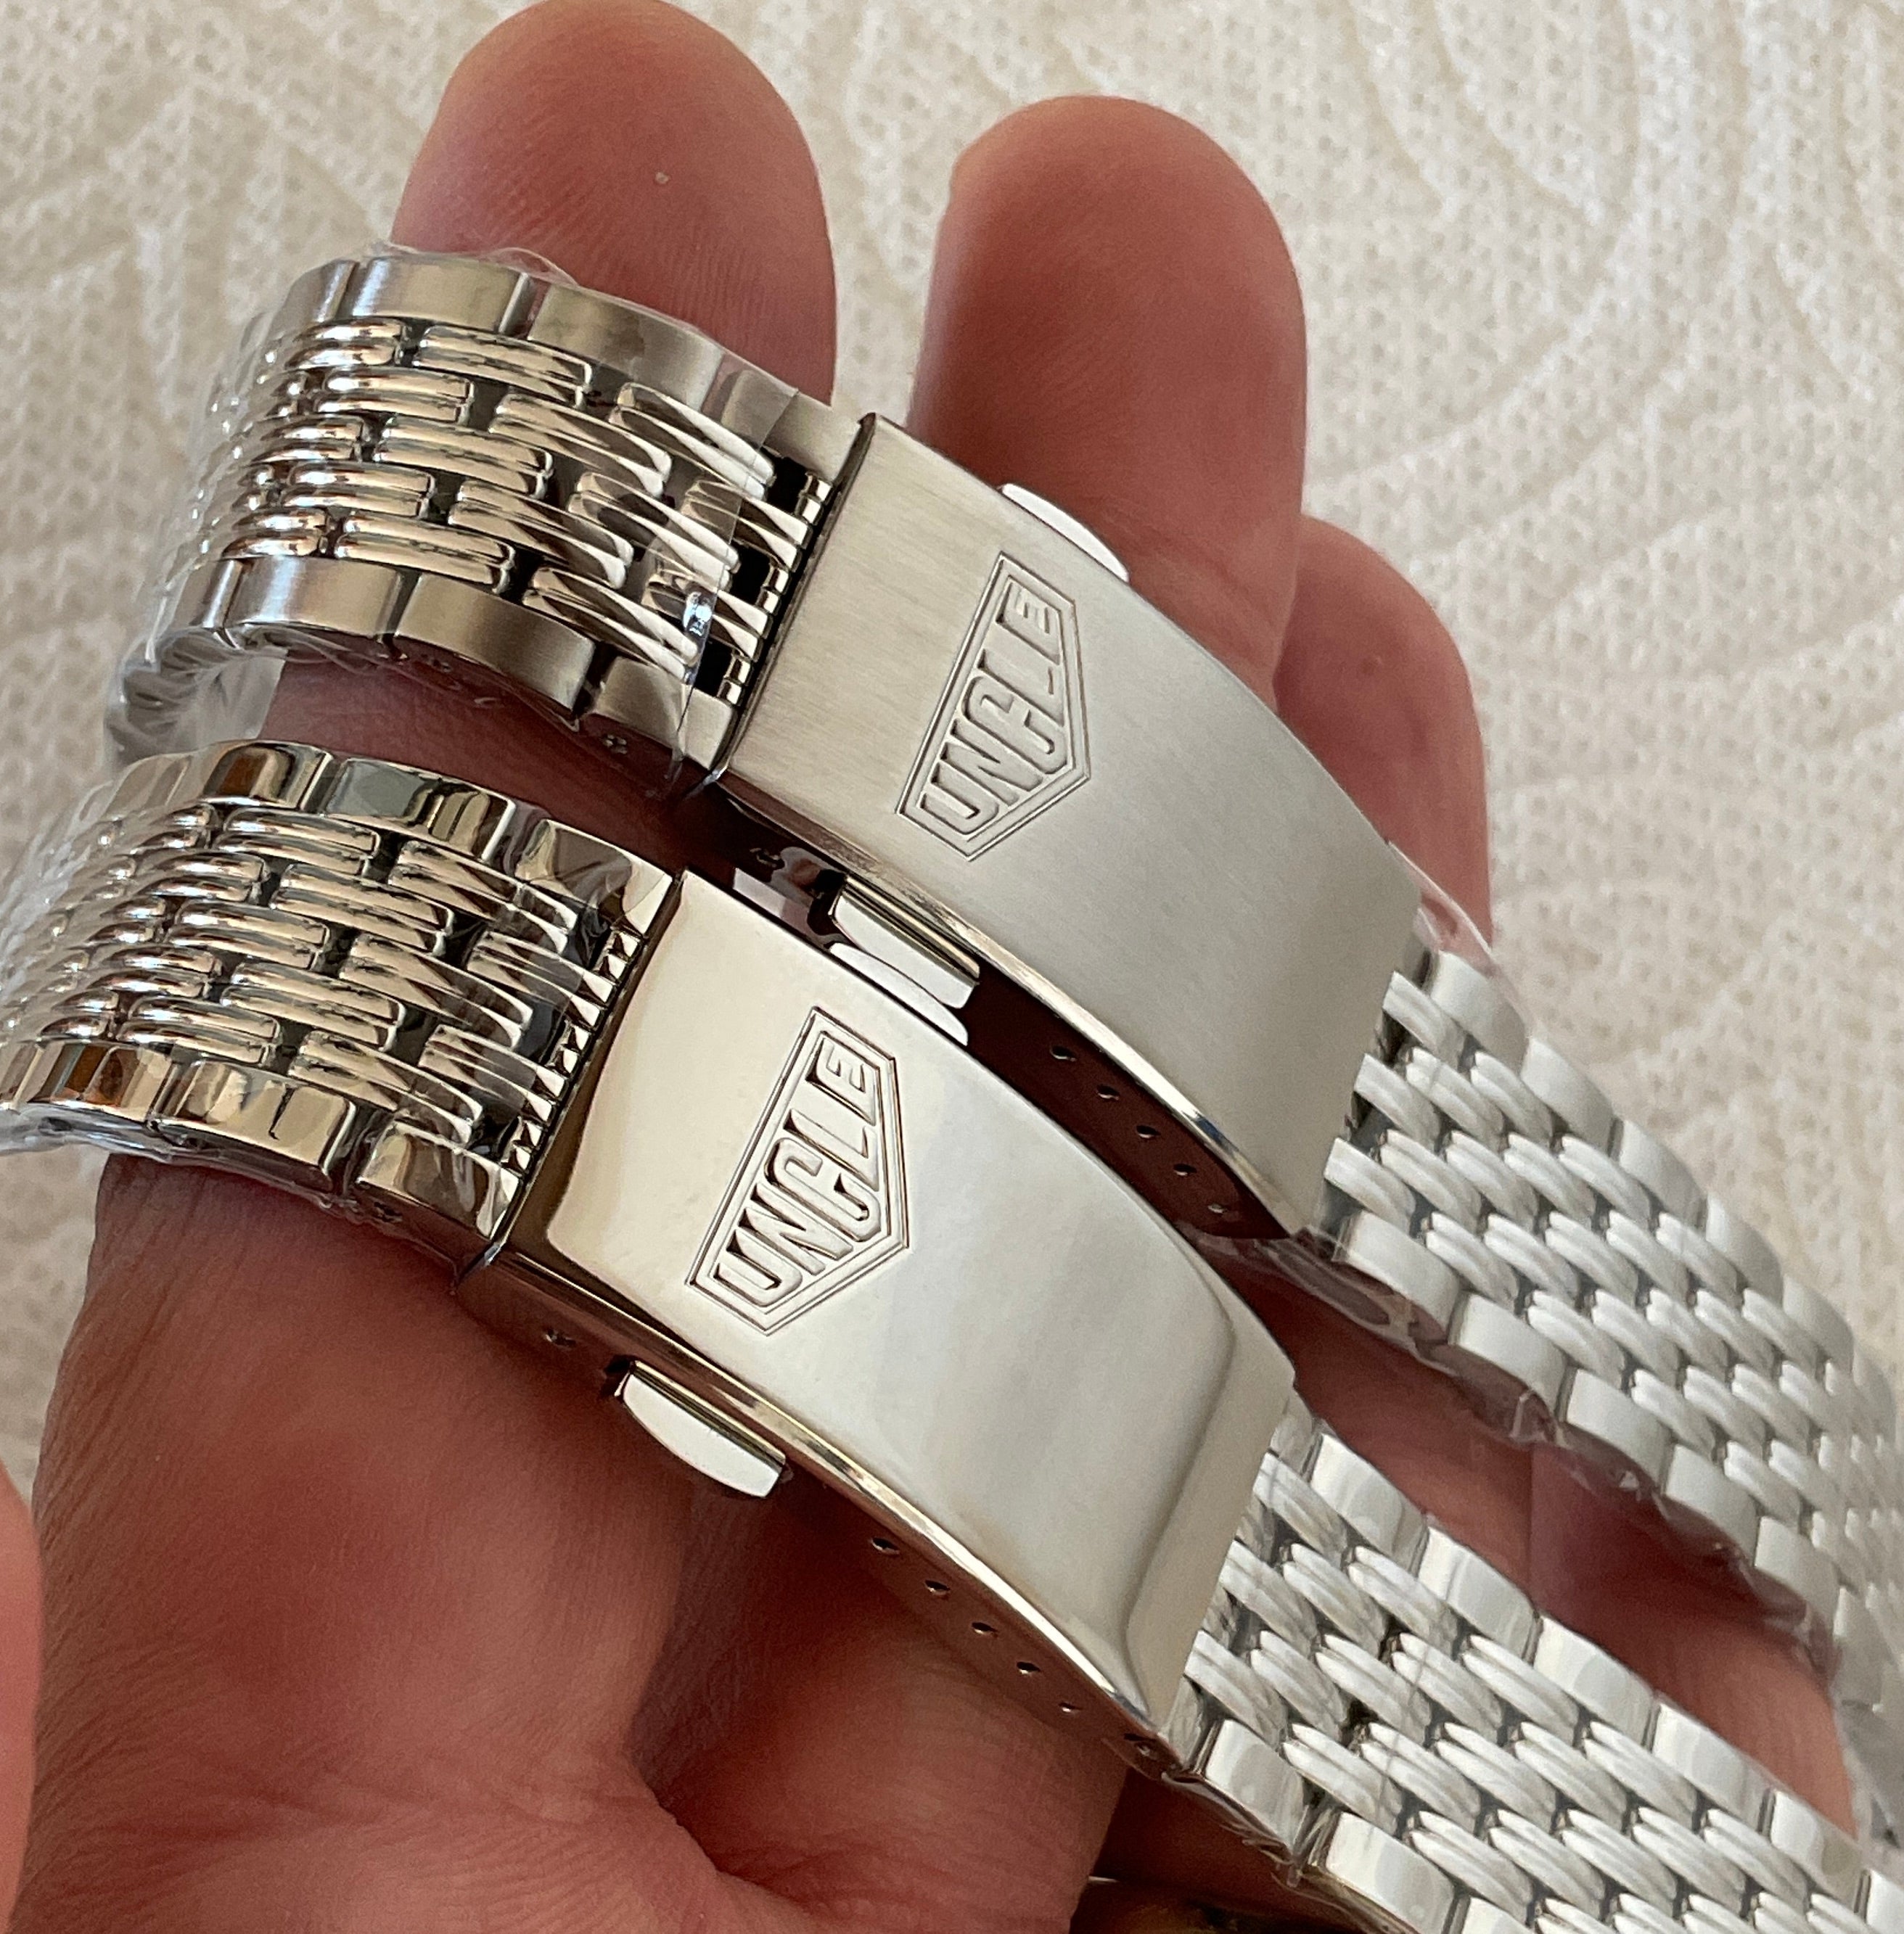 [Uncle] Beads of Rice Bracelet (Tag Heuer Carrera)